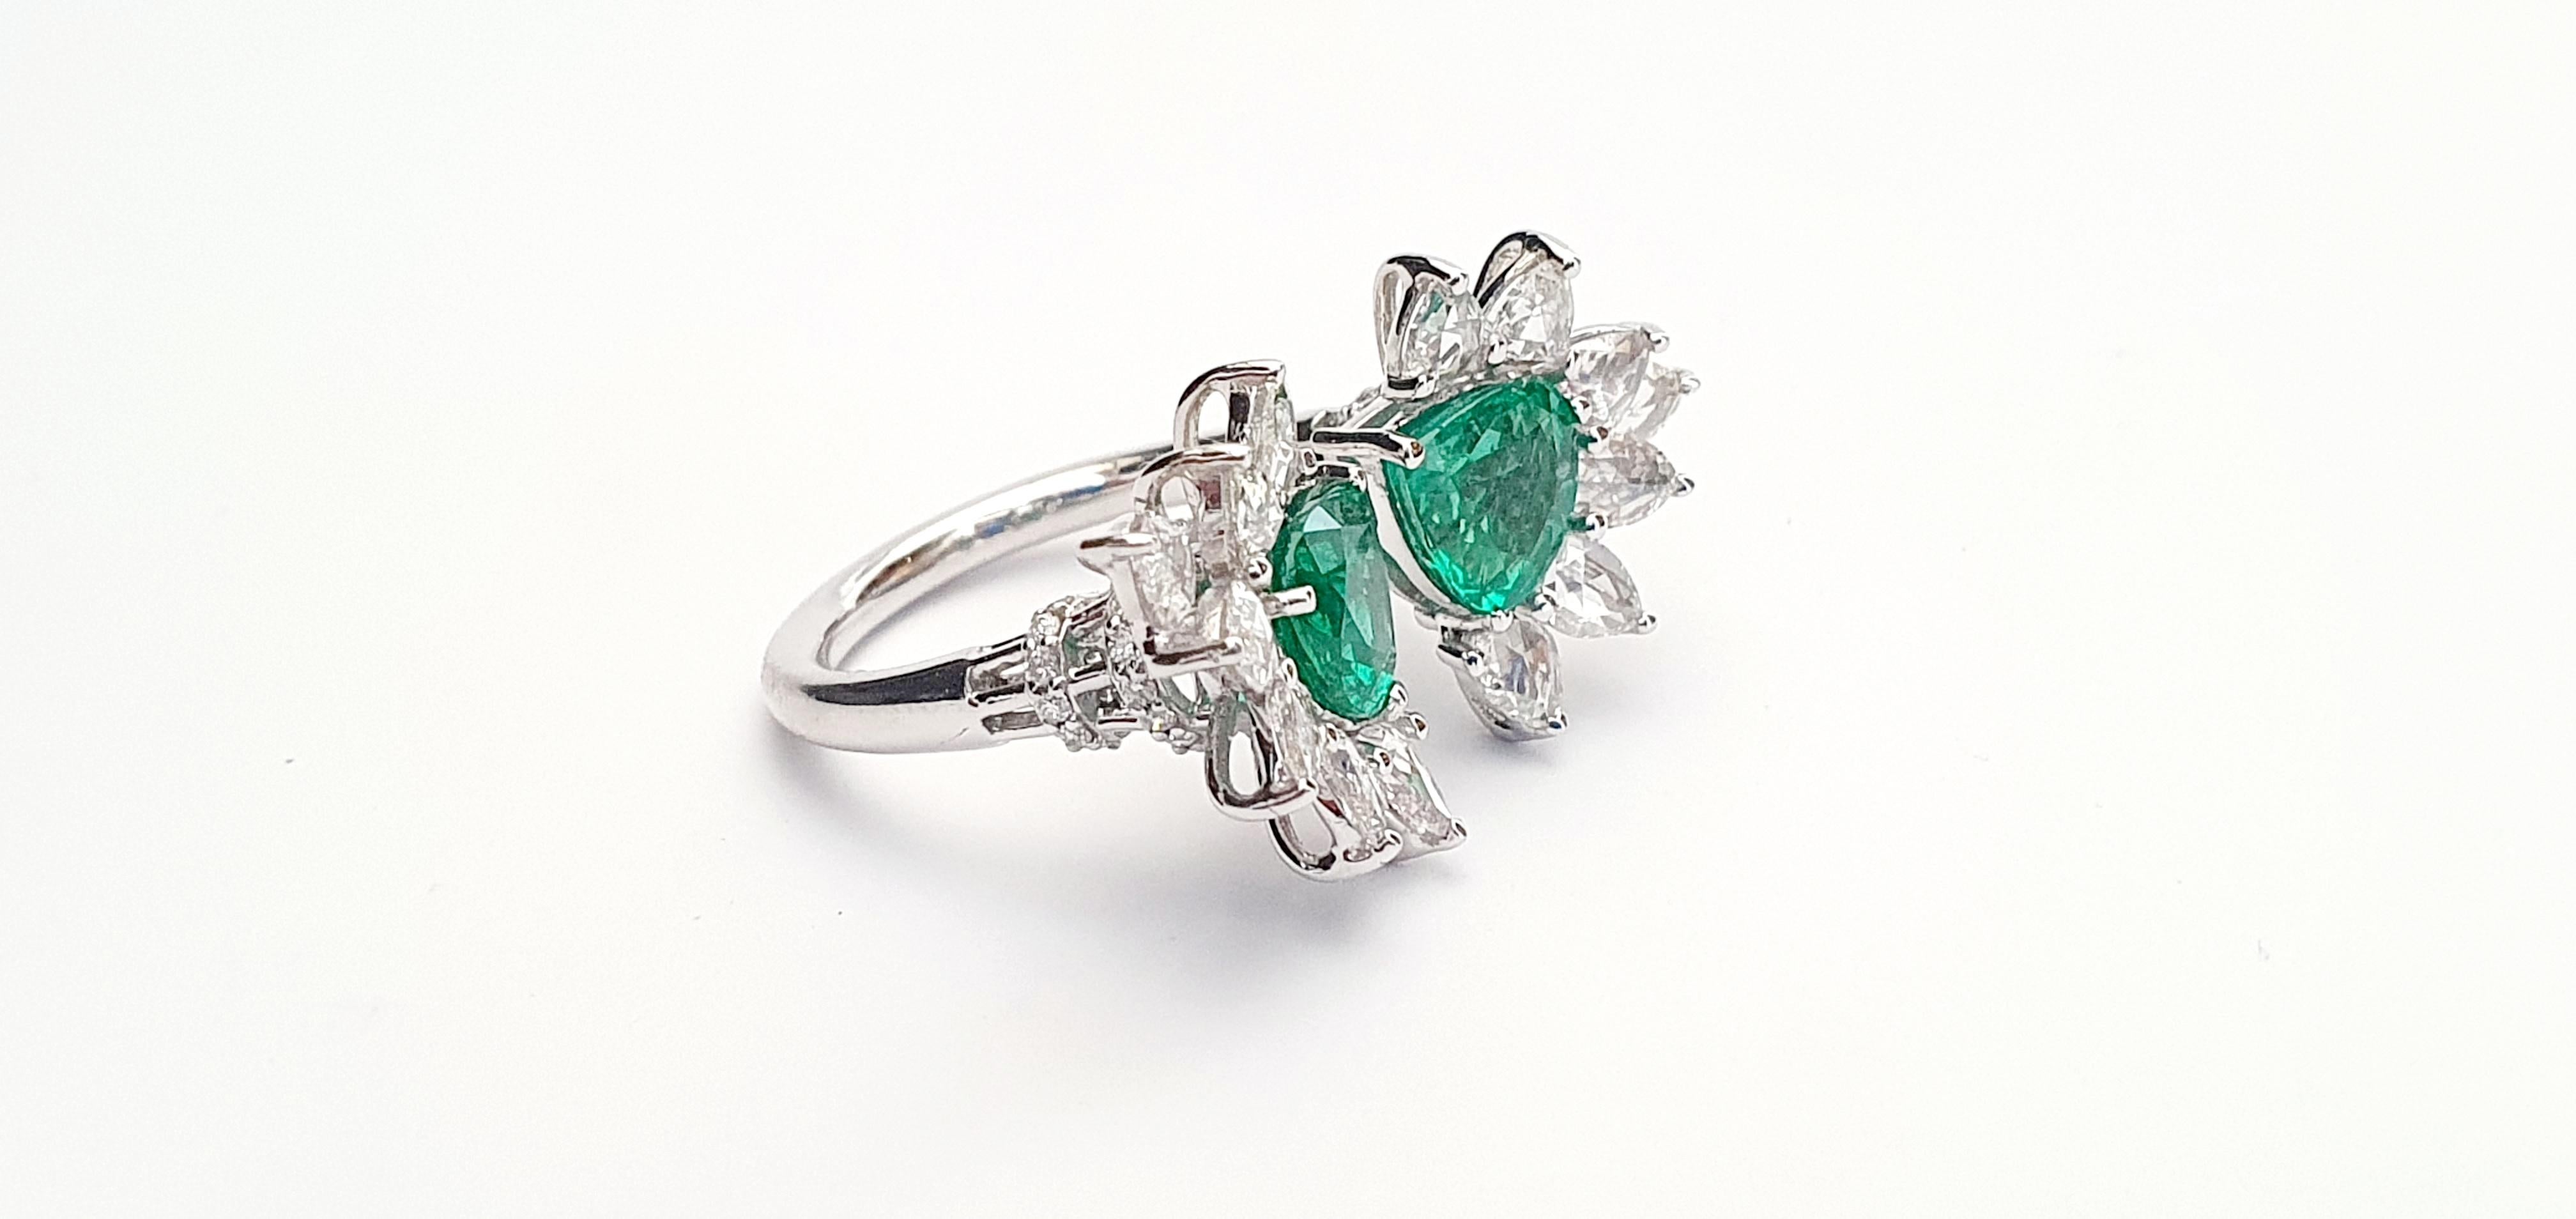 It's an exclusive emerald & diamond ring studded in 18k white gold with 2 pcs of trillion shaped emeralds weight 2.02 Cts with 14 pcs of pear shaped rose cut diamonds weight 1.37 Cts & 0.25 Cts of round shaped diamonds, this entire ring is made of